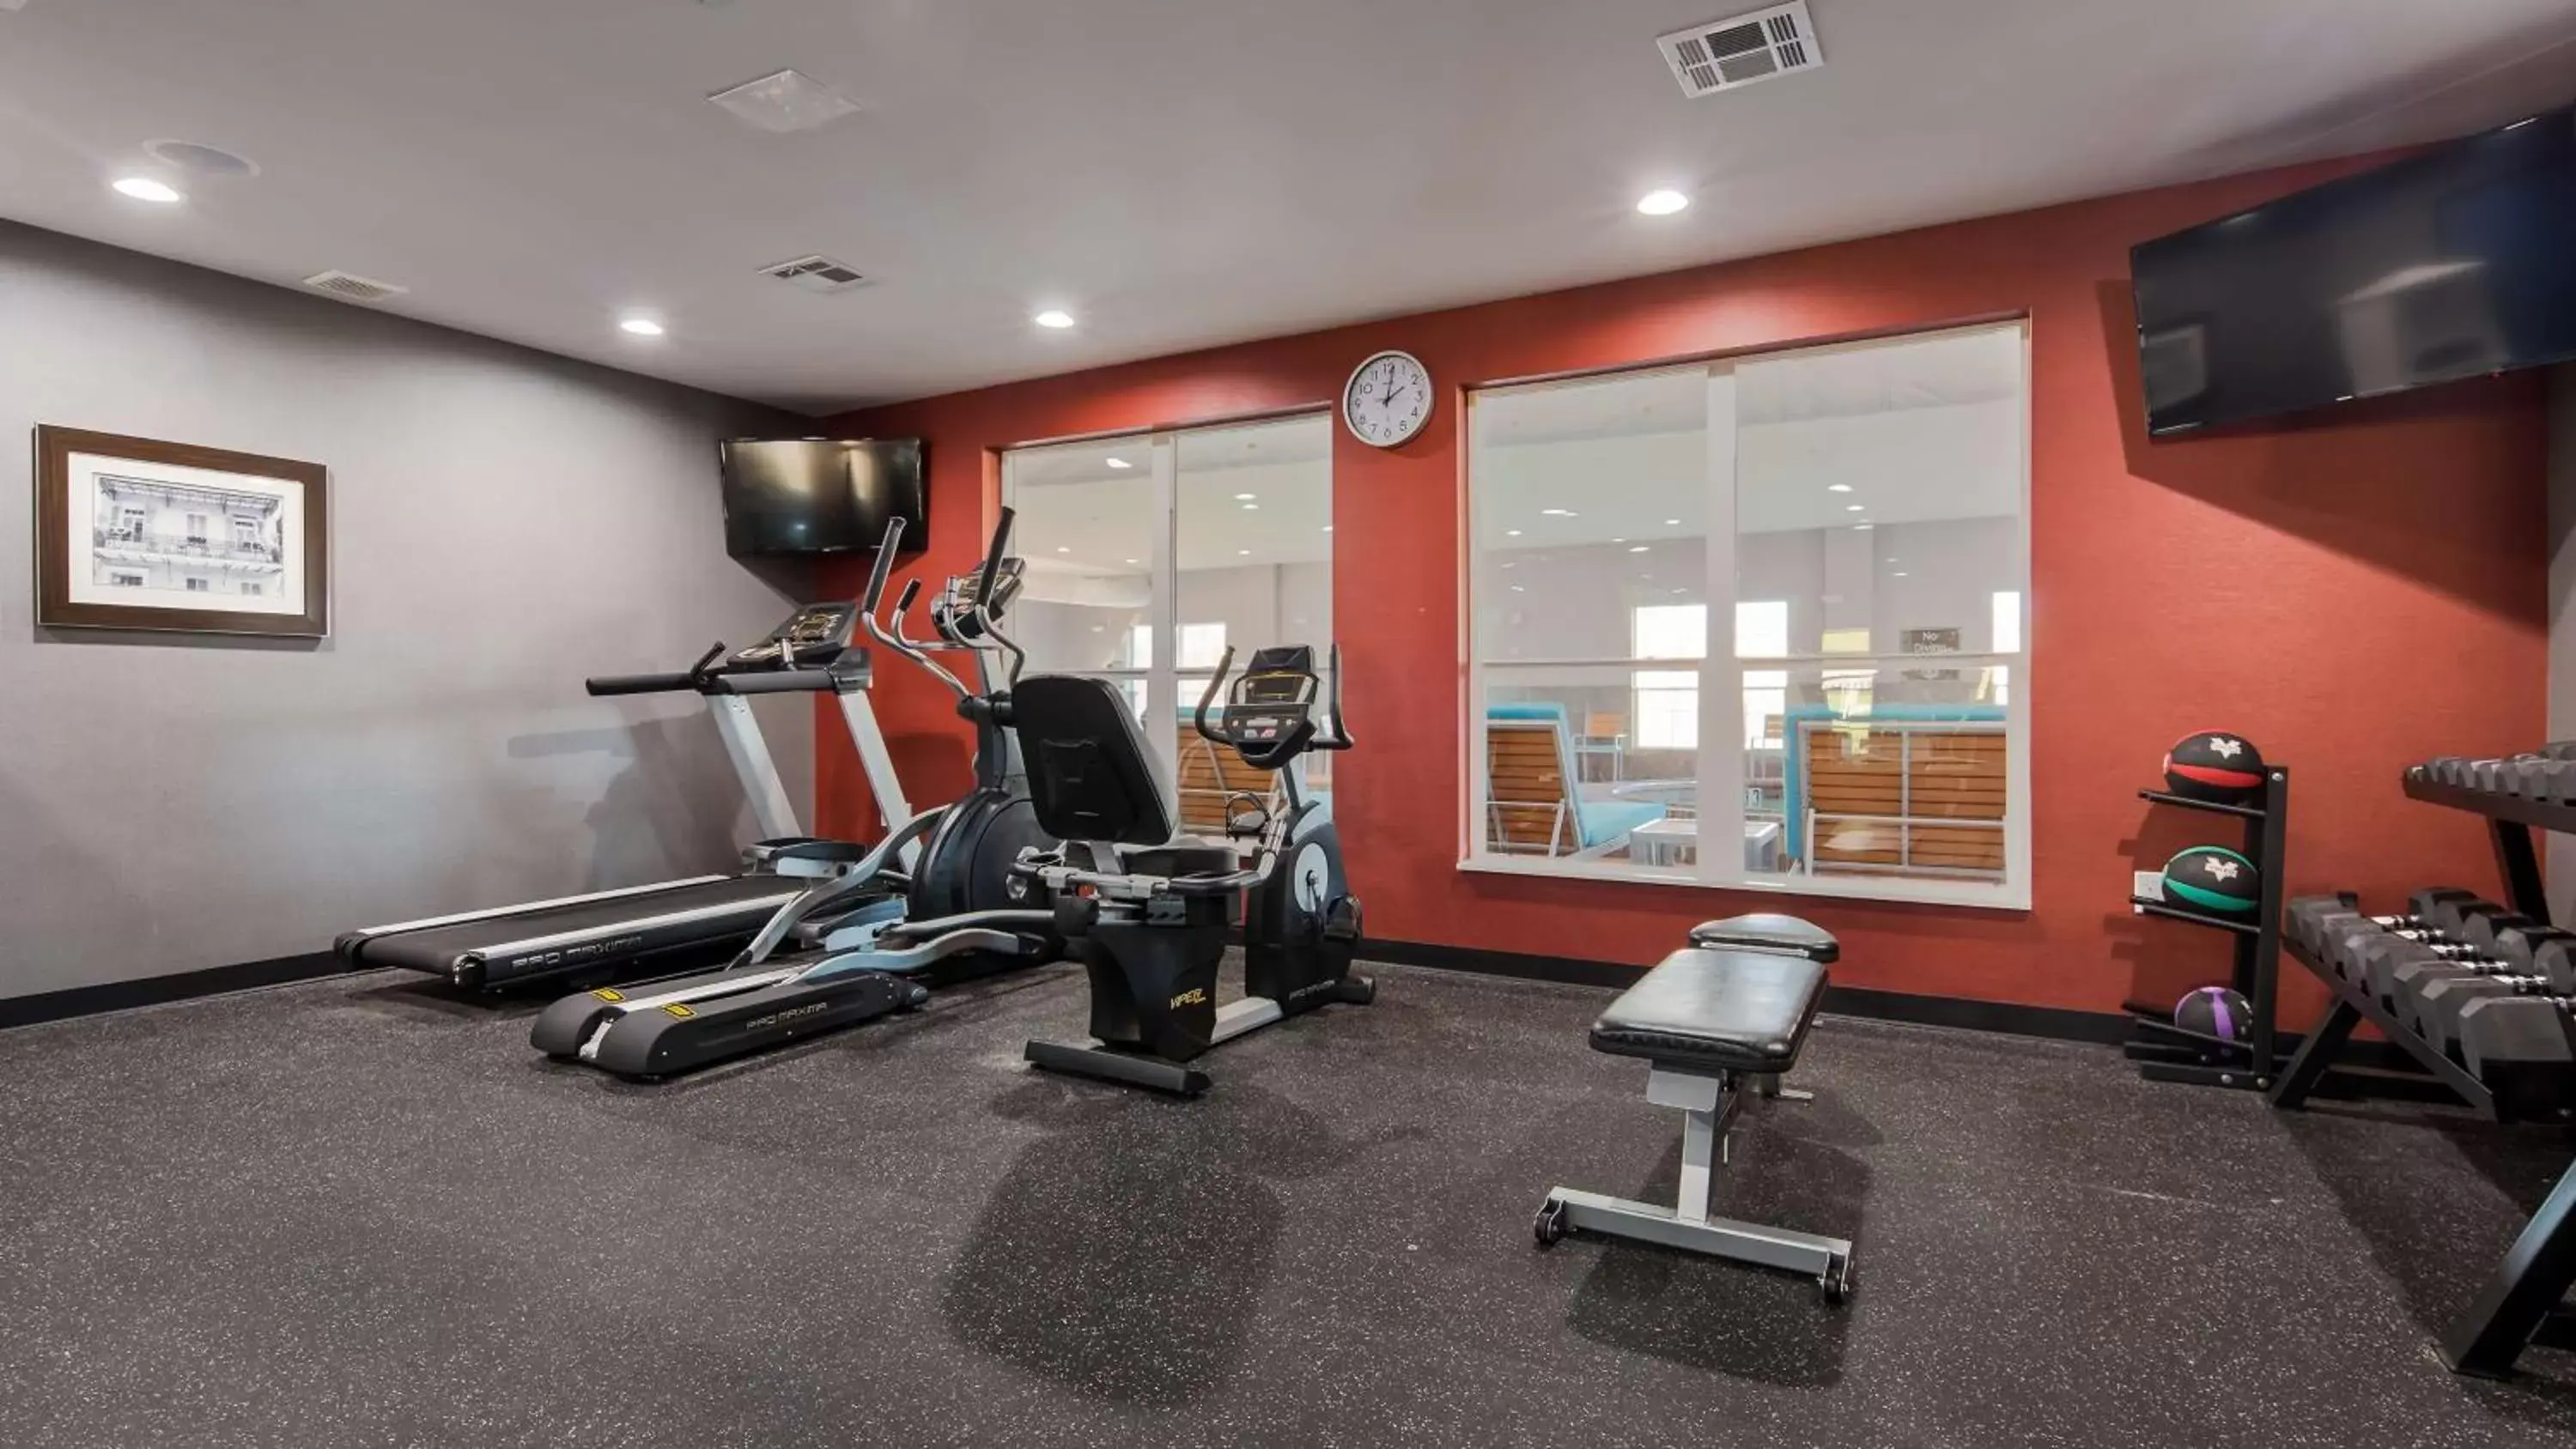 Fitness centre/facilities, Fitness Center/Facilities in Best Western Plus Airport Inn & Suites